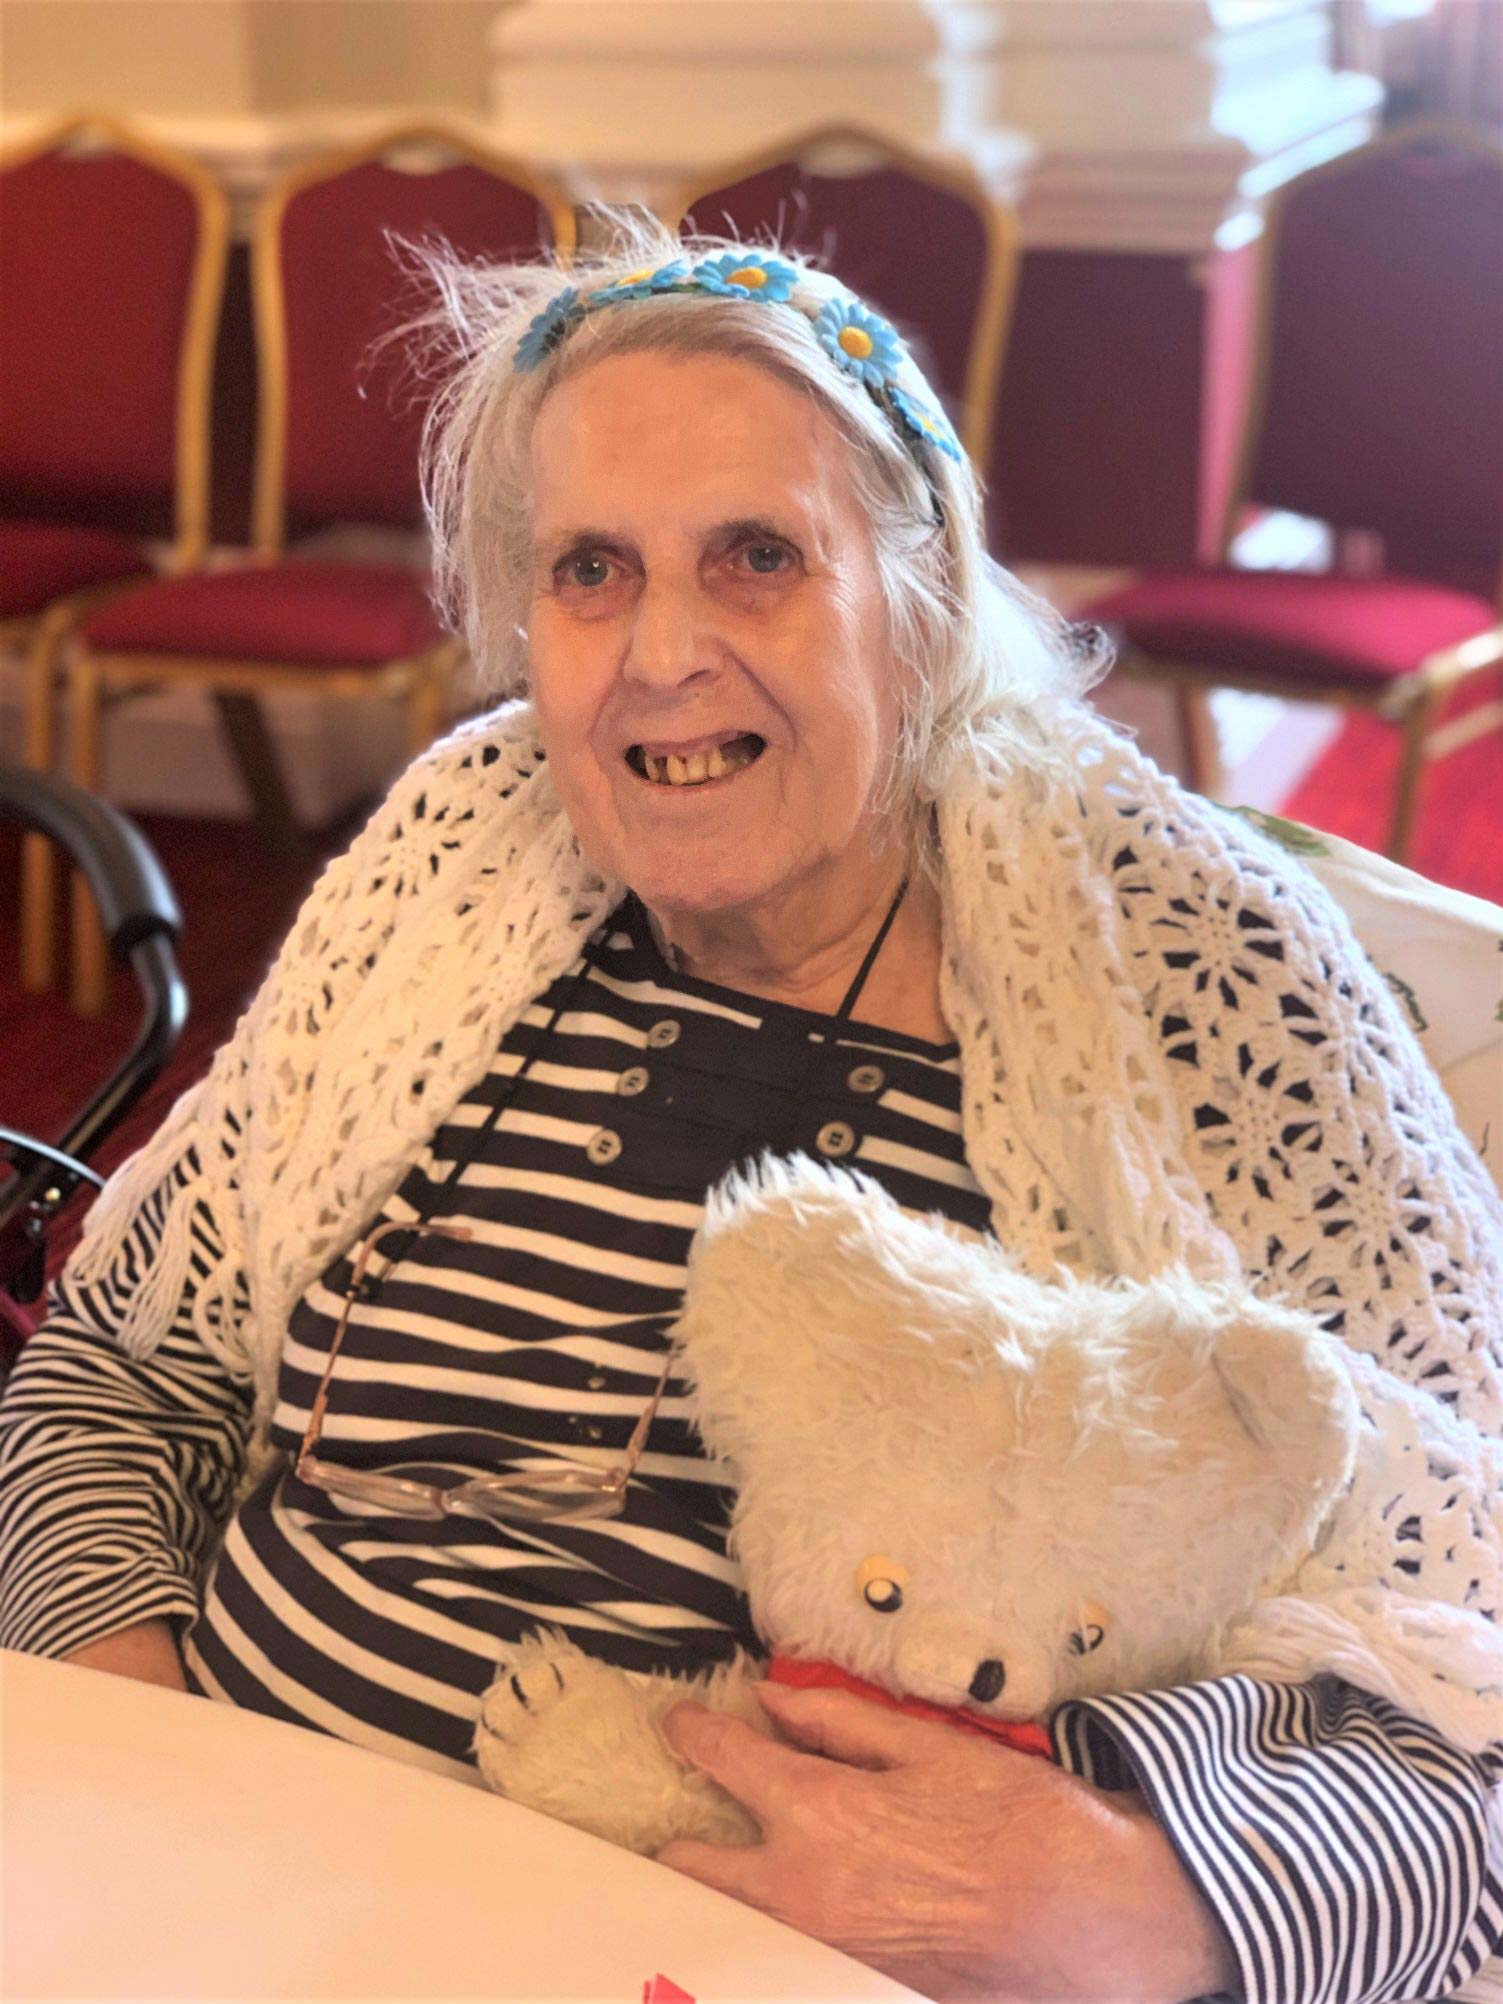 The-Granby-Resident-Glenys-with-her-teddy-bear